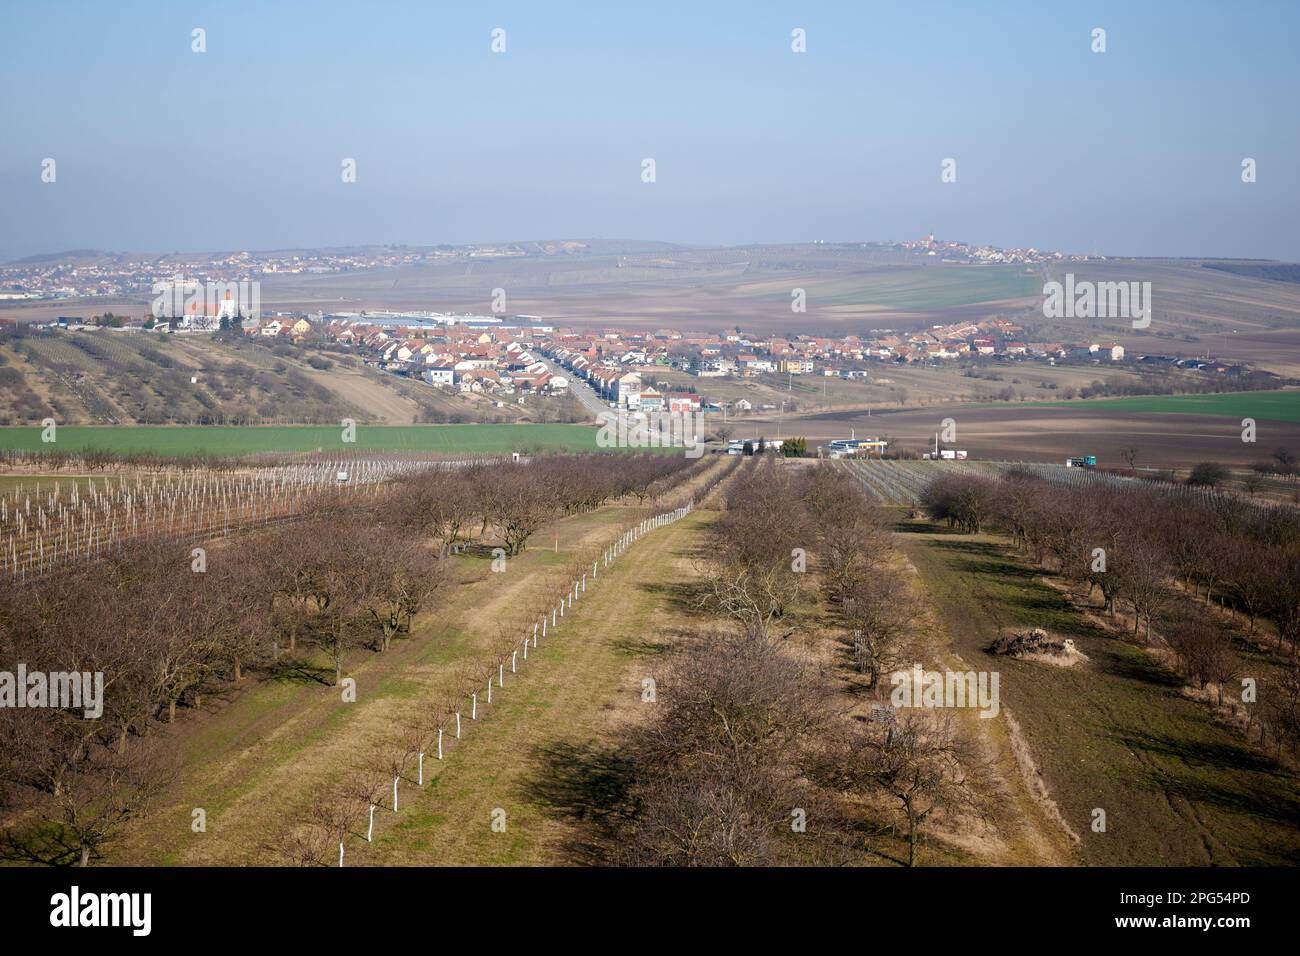 A rural landscape featuring a farm and buildings in the distance, Velke Pavlovice, czech republic Stock Photo